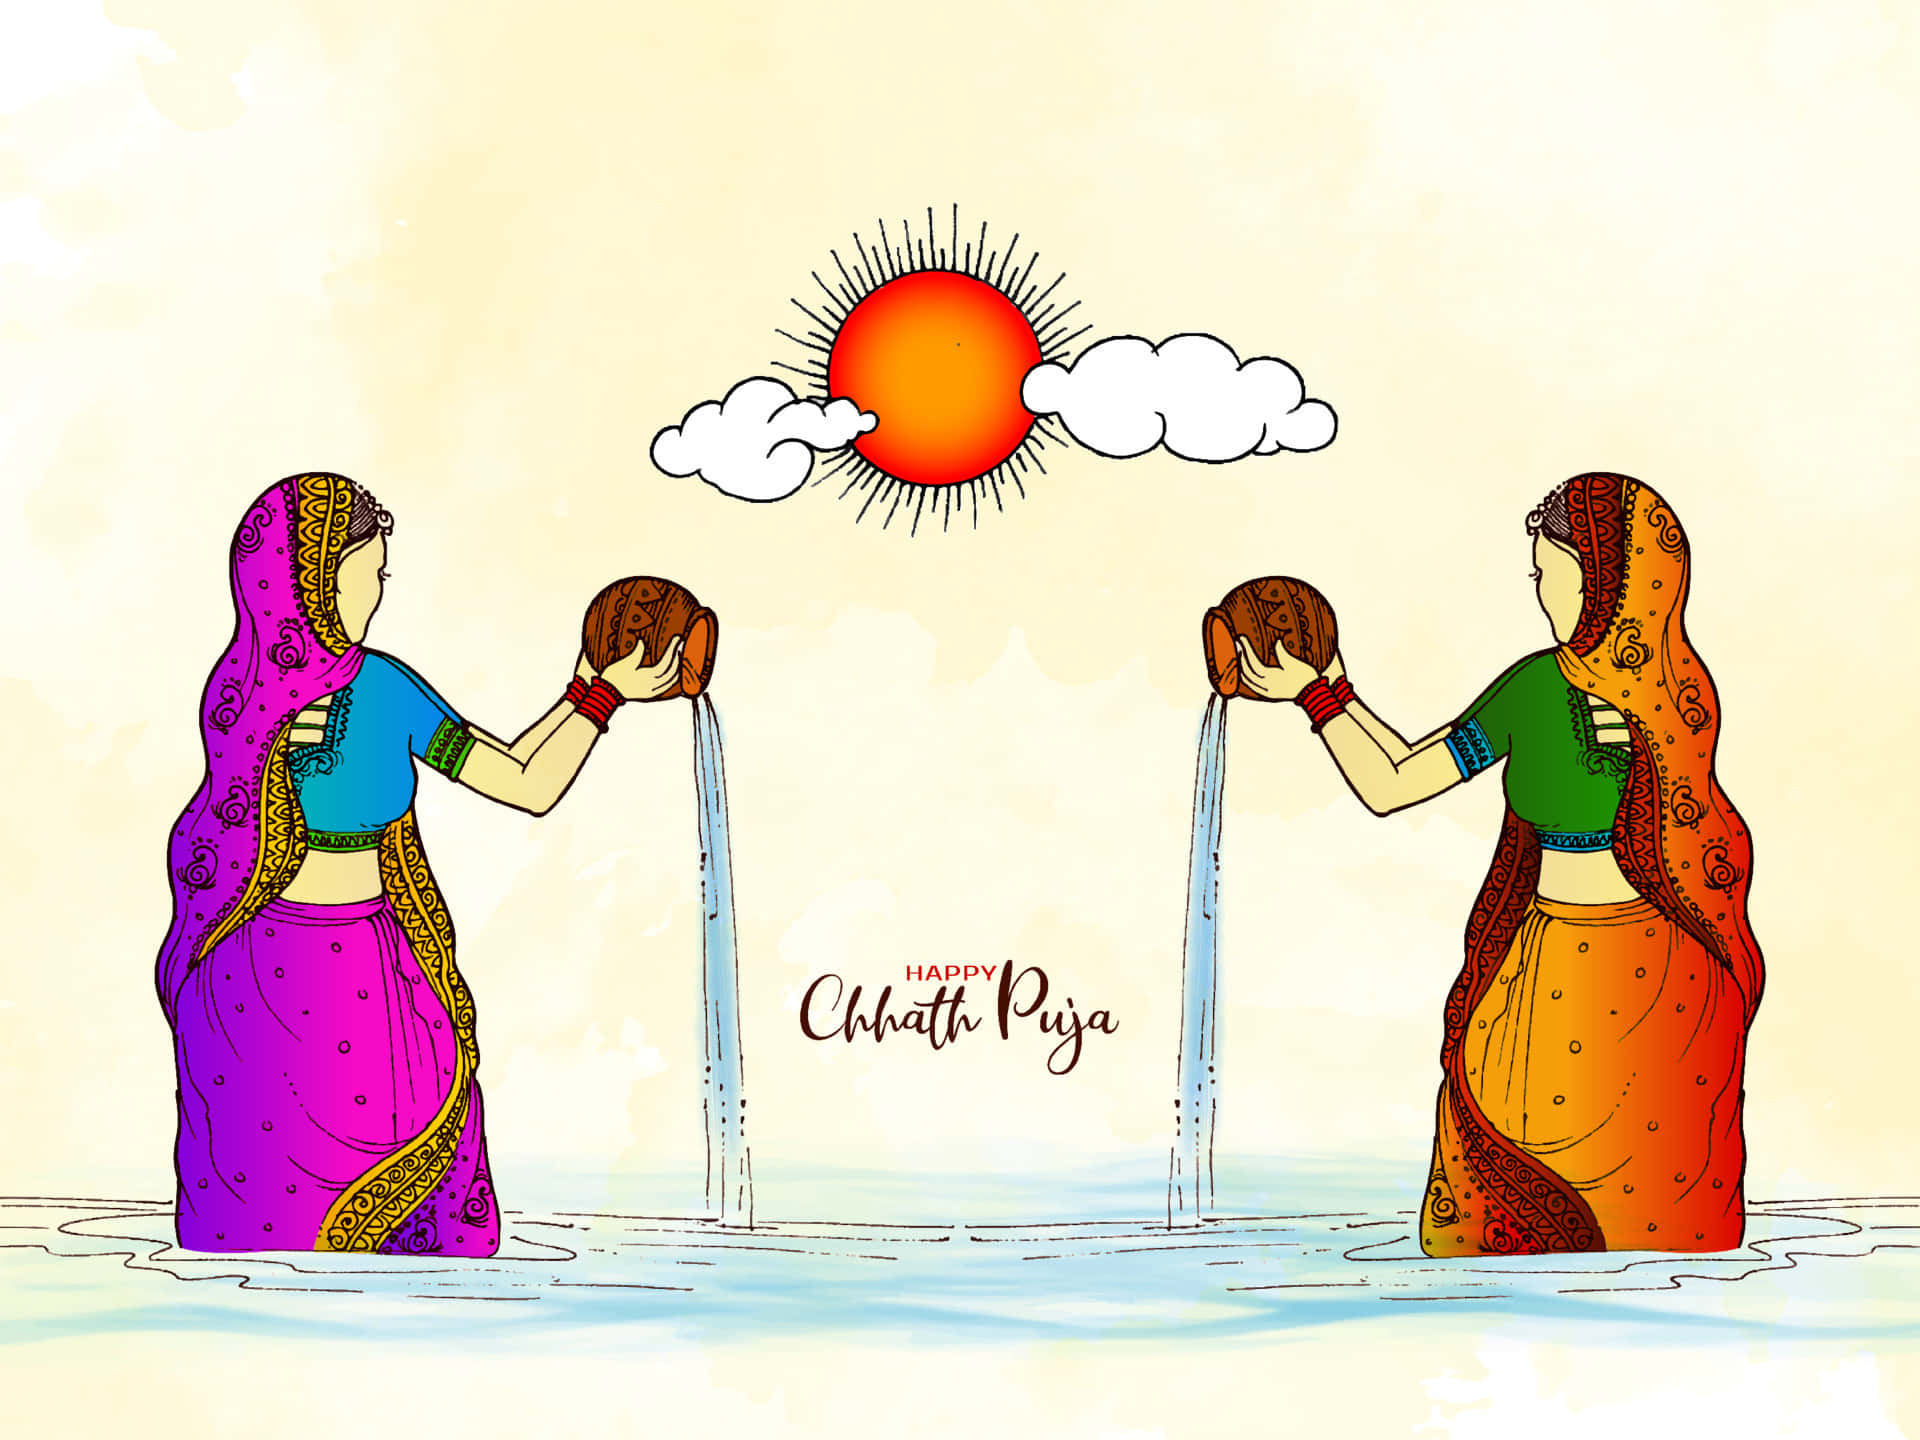 Chhath puja poster editing background Total PNG | Free Stock Photos